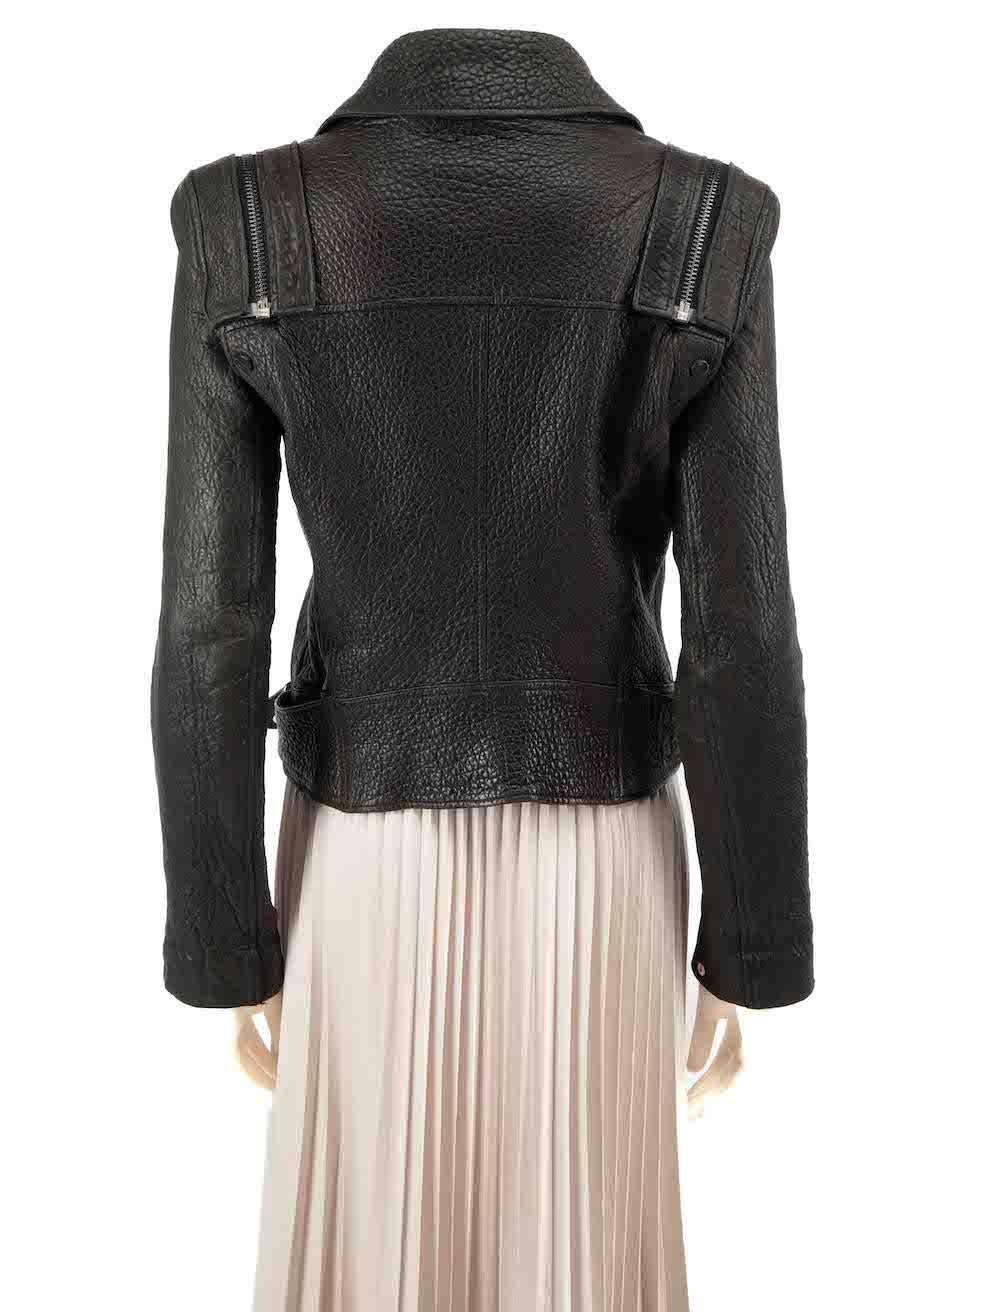 All Saints Black Leather Detachable Sleeves Biker Jacket Size M In Good Condition For Sale In London, GB